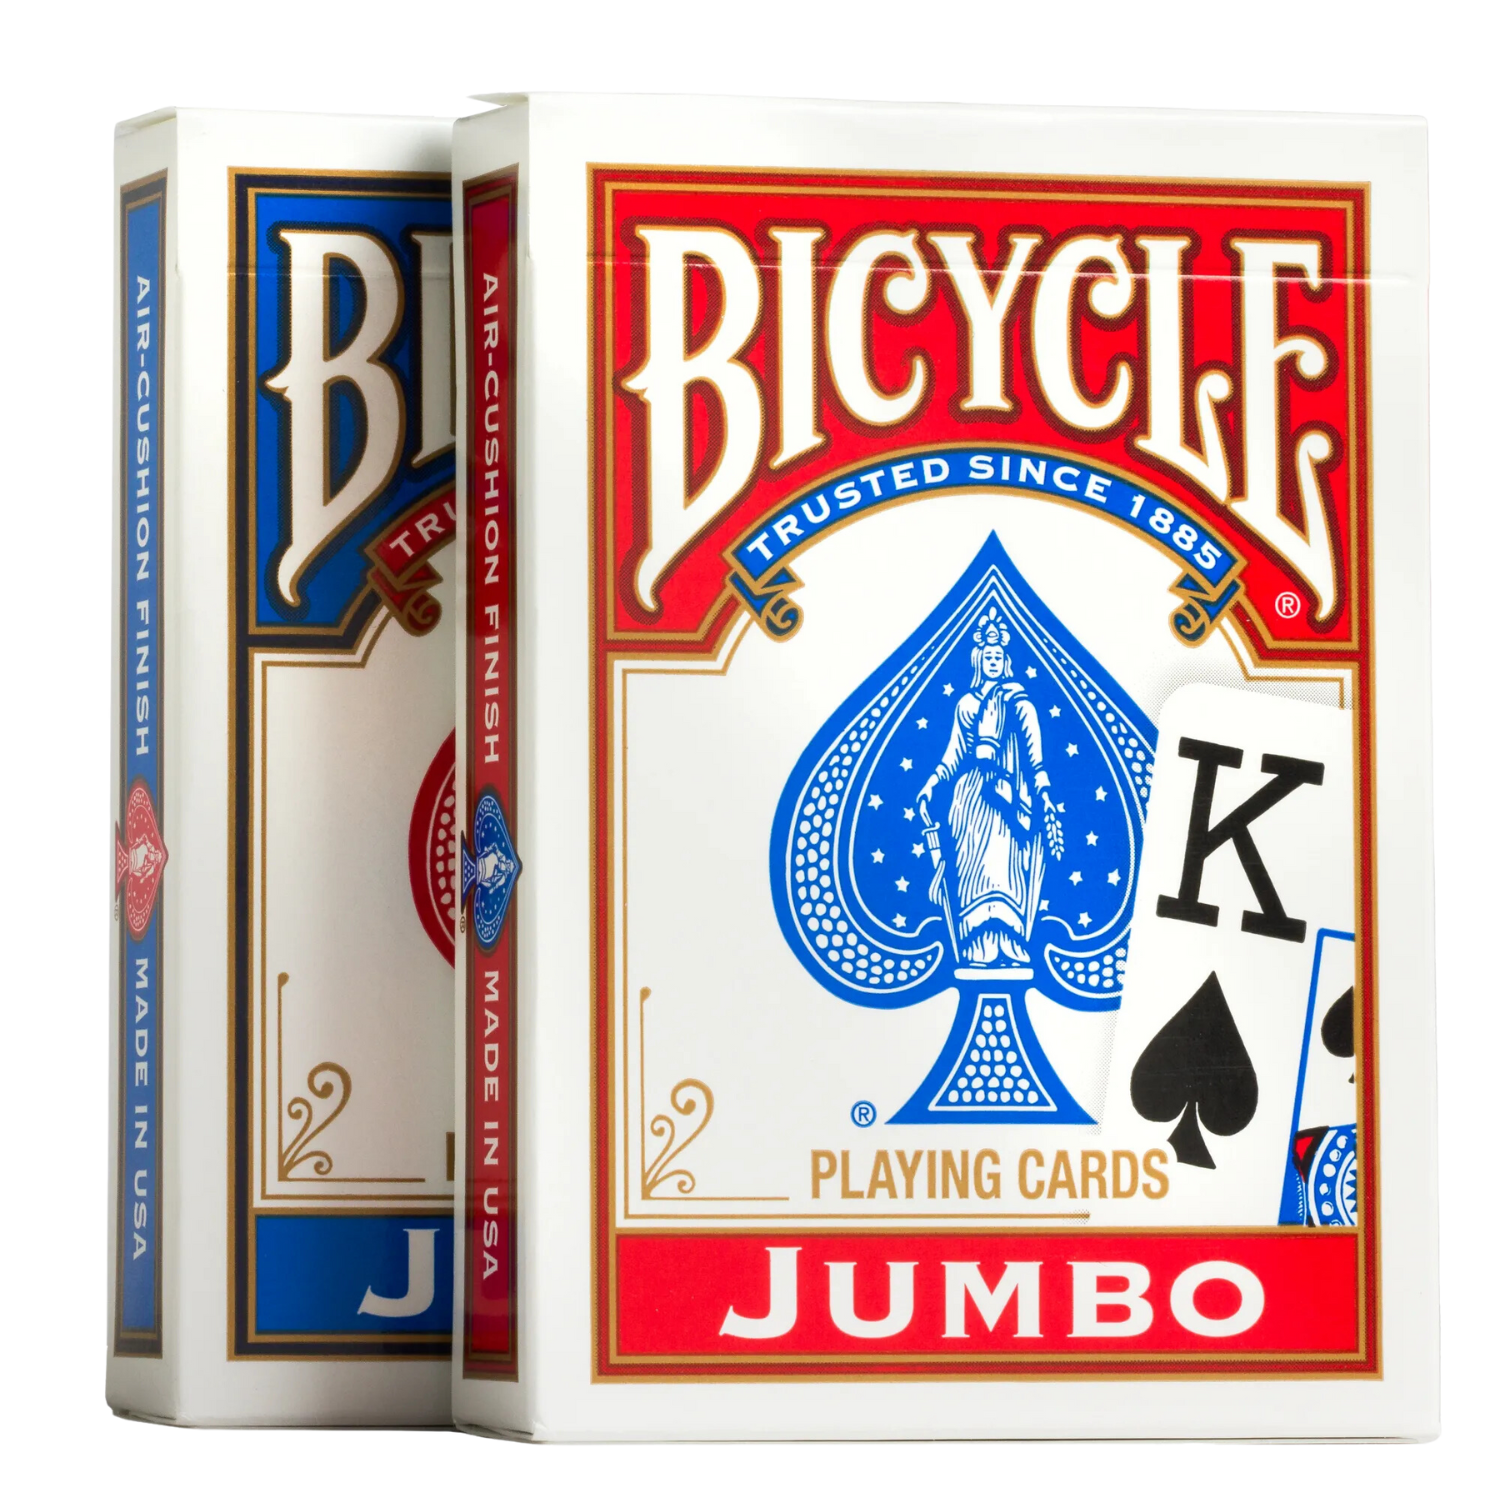 Image of the red and blue packs of Bicycle Jumbo Index Playing Cards.